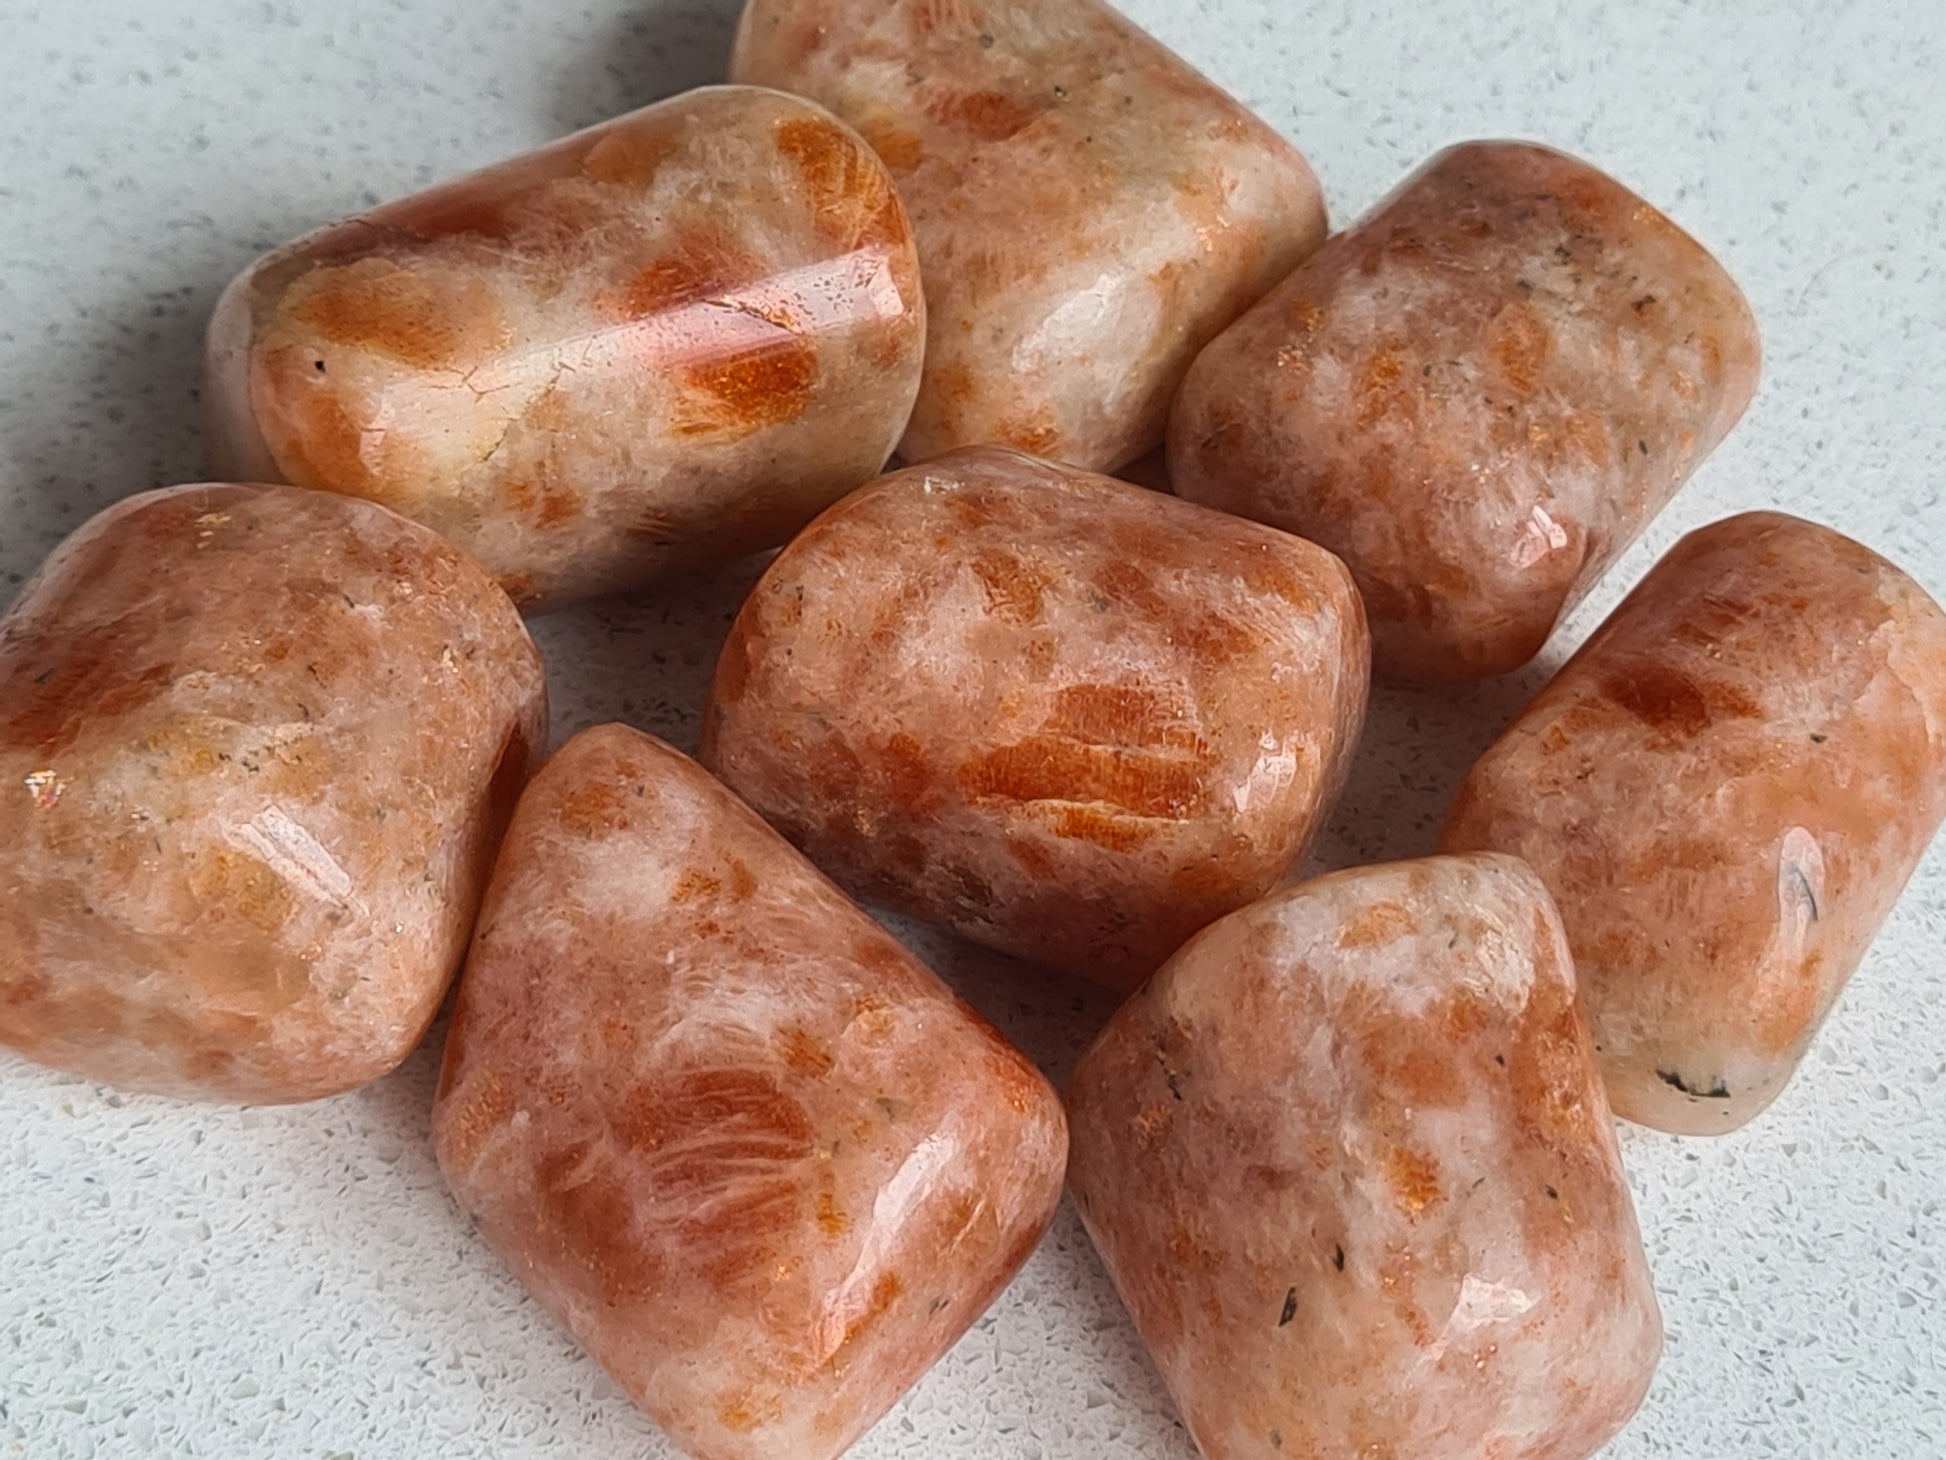 Golden Sunstone Tumbles from India approx 20-30g each